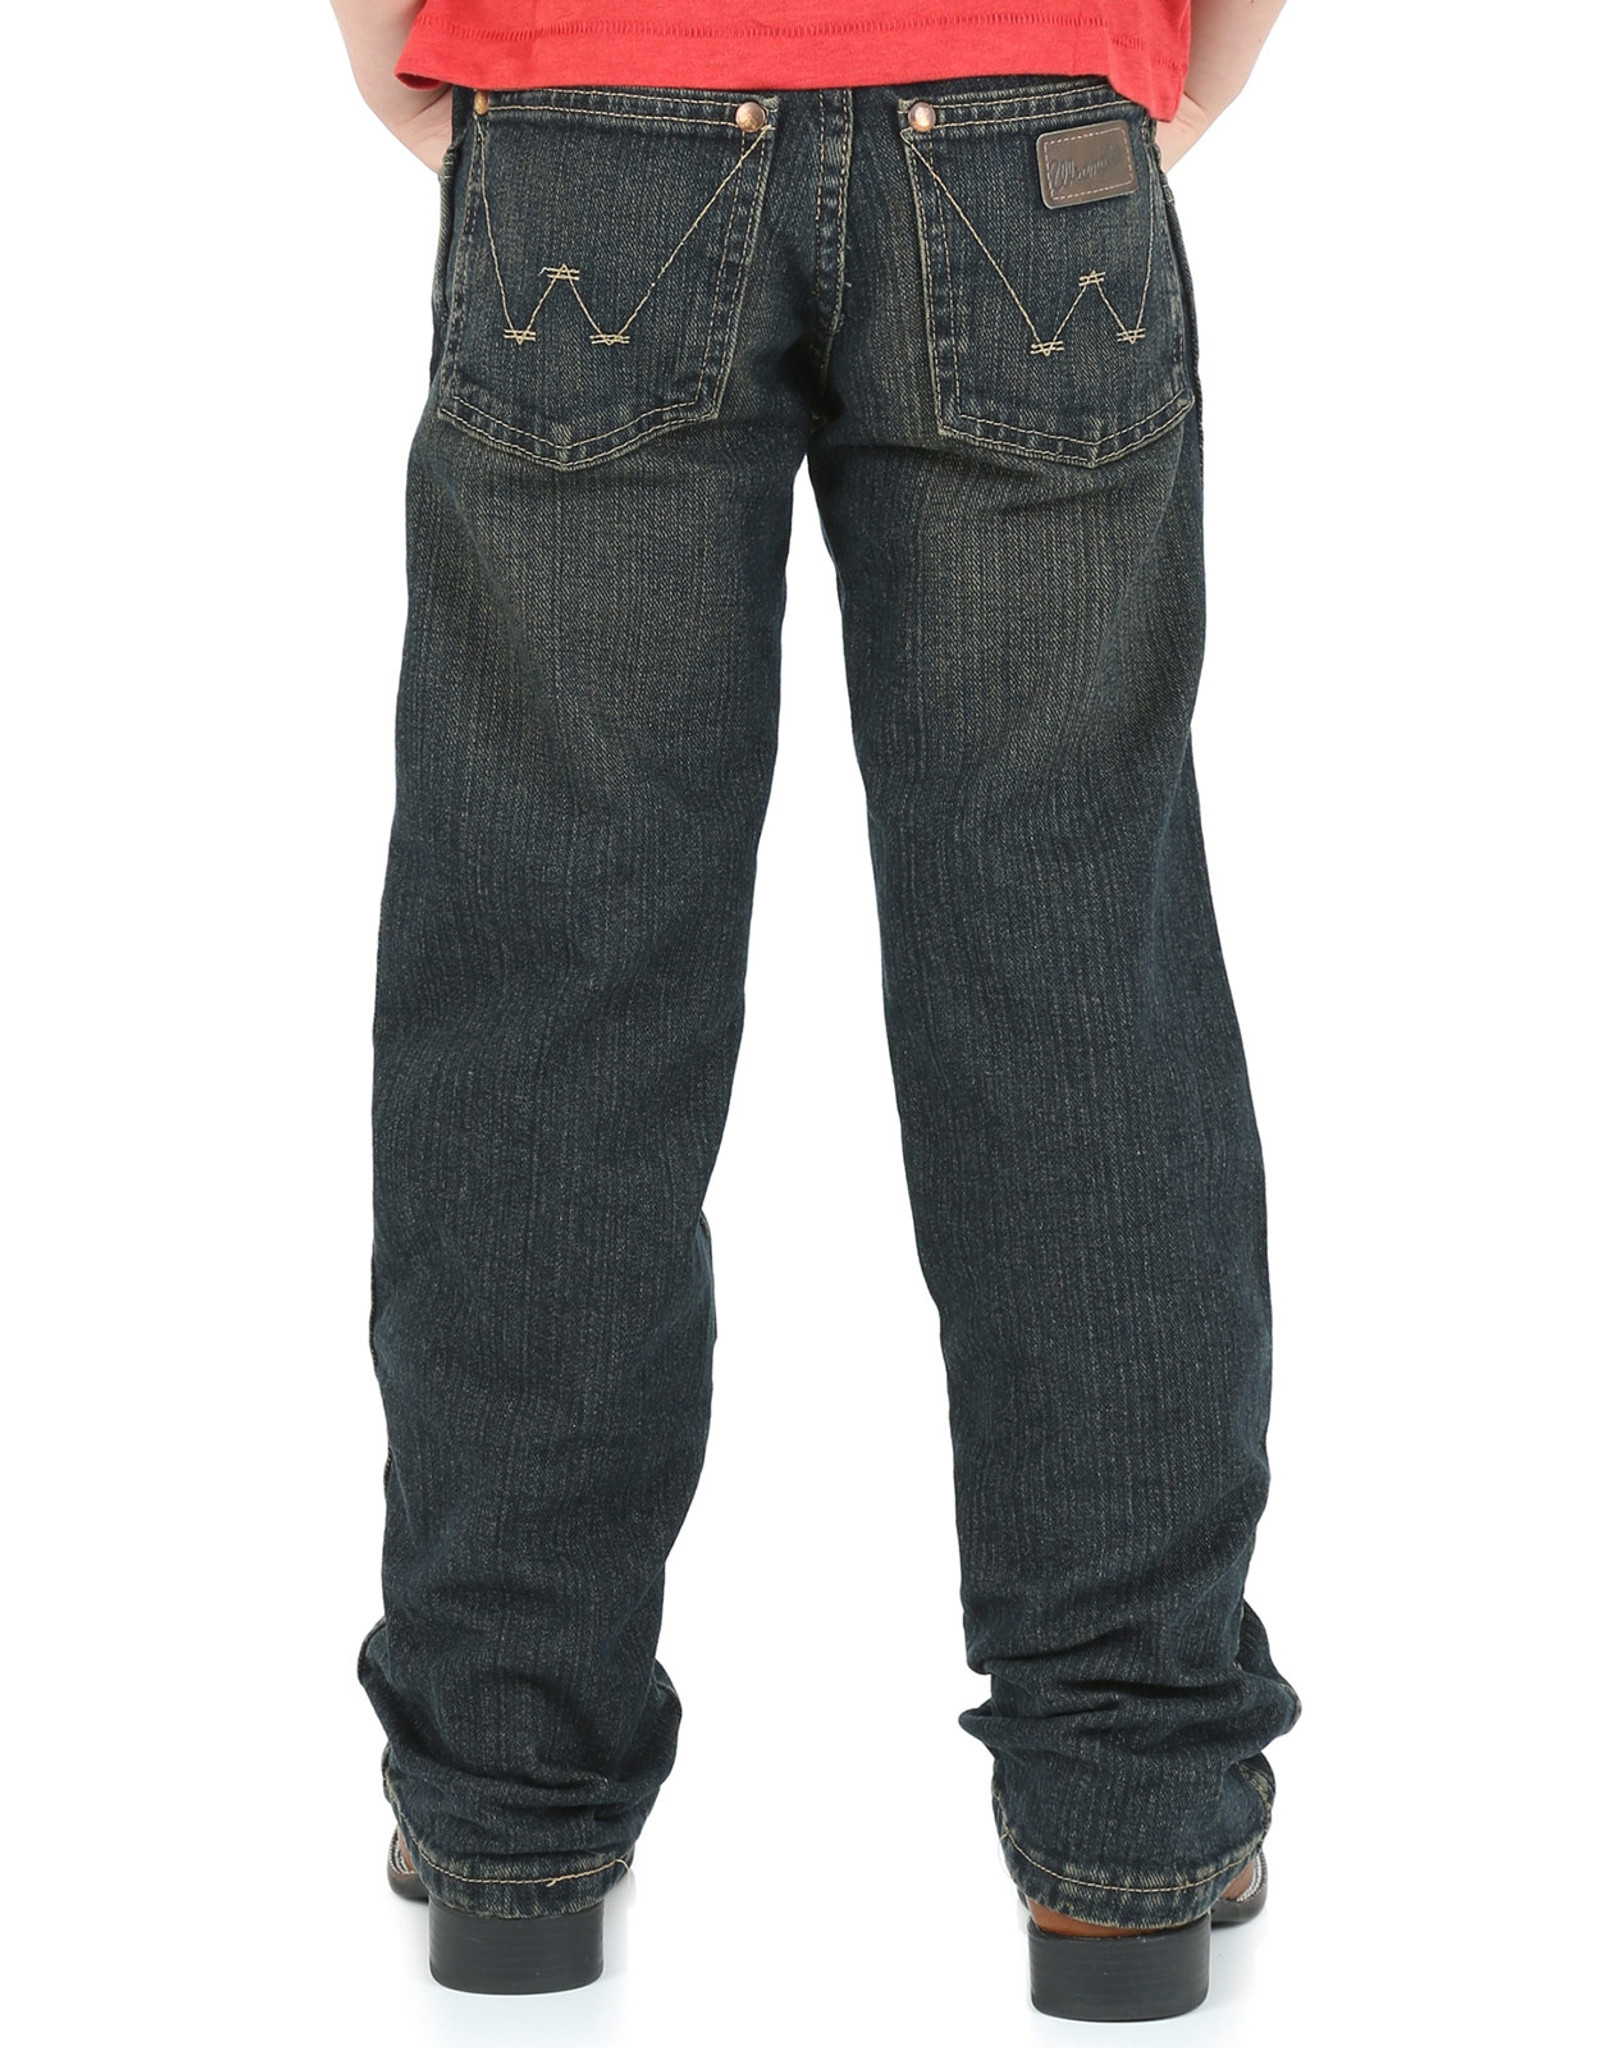 Wrangler Boy's Retro Low Rise Relaxed Fit Straight Leg Jeans (Sizes 1T-7) - Rolling River